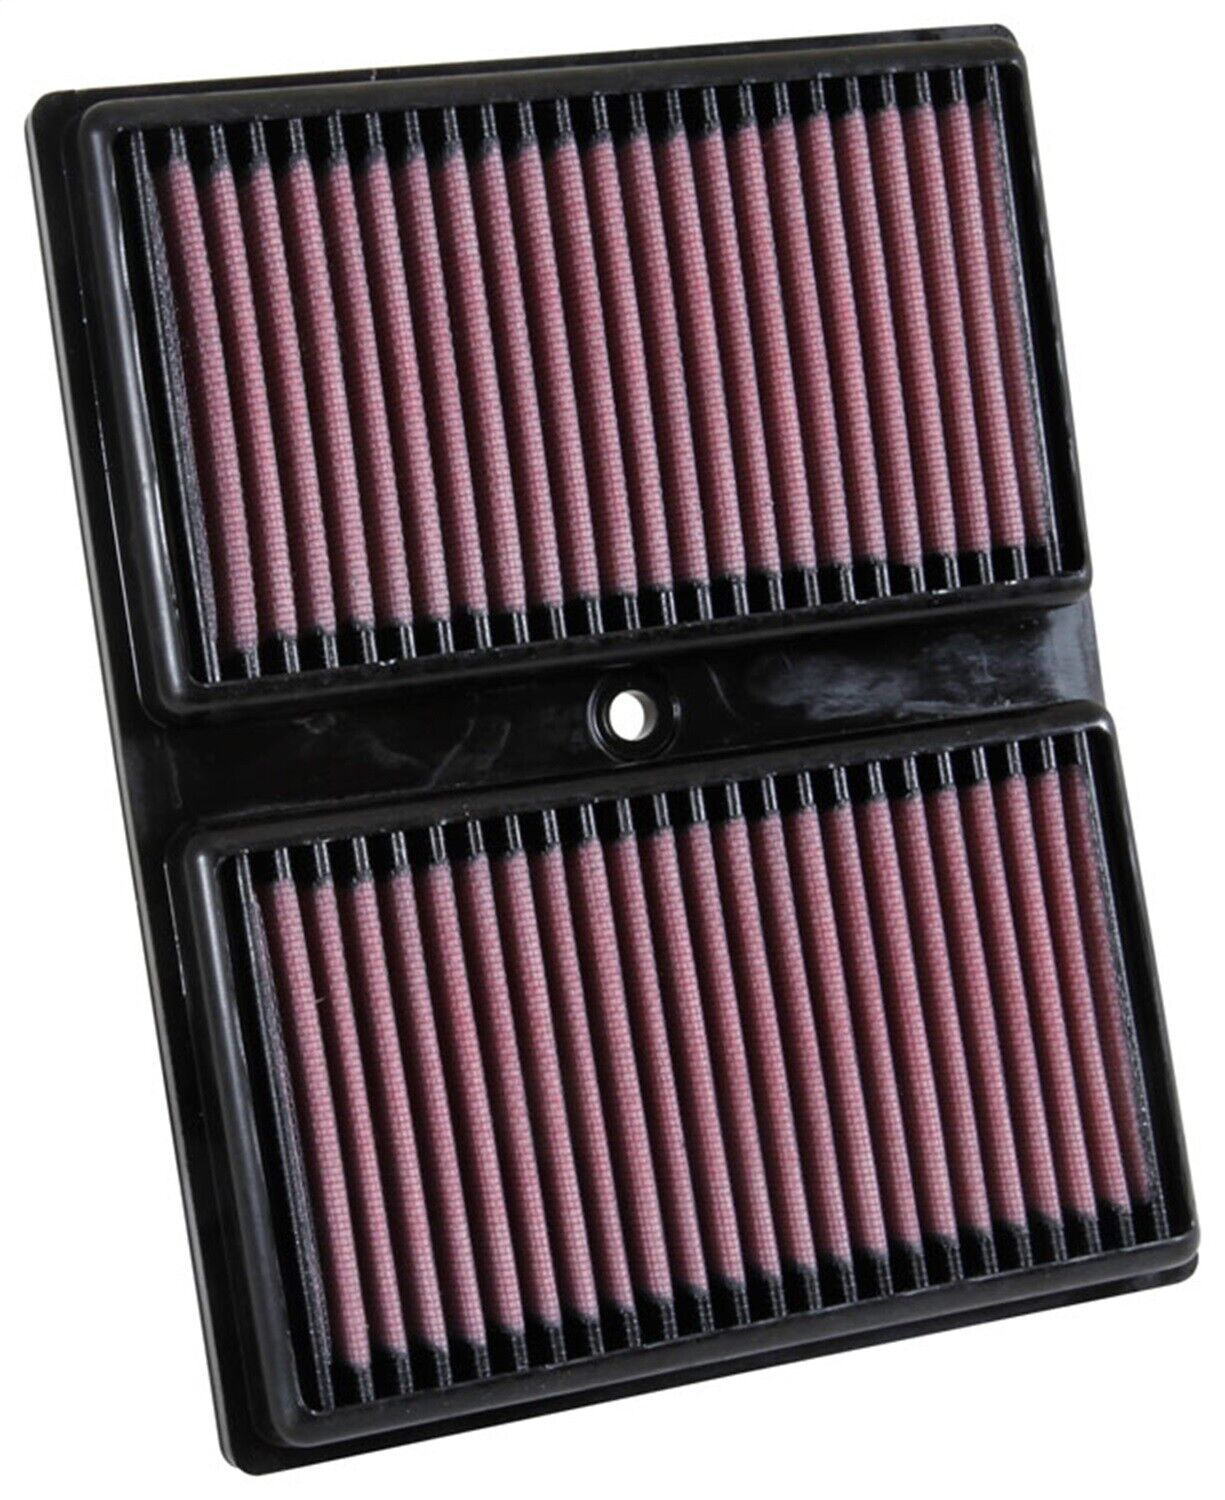 K&N Filters 33-3037 Air Filter Fits 17-20 A1 Ibiza Toledo Up